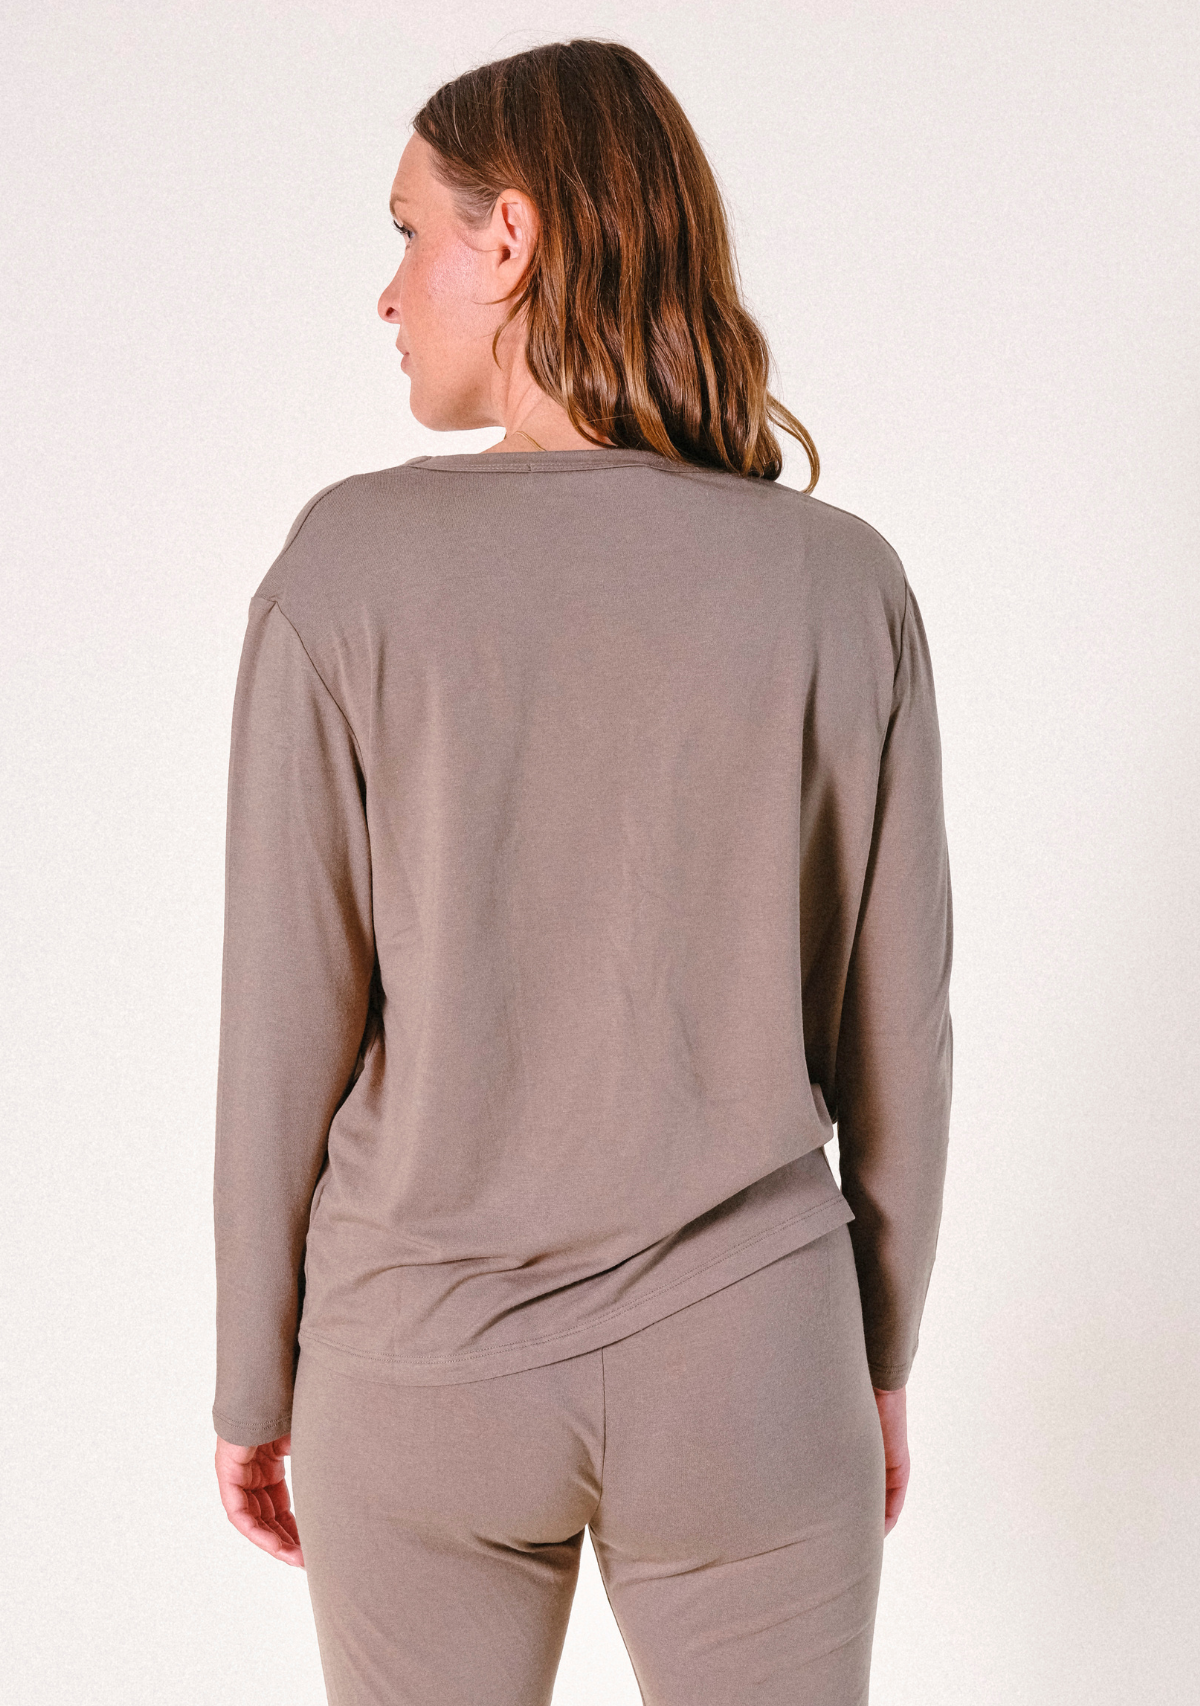 Women's Bamboo Jersey Pajama Shirt color Olive XS-3X